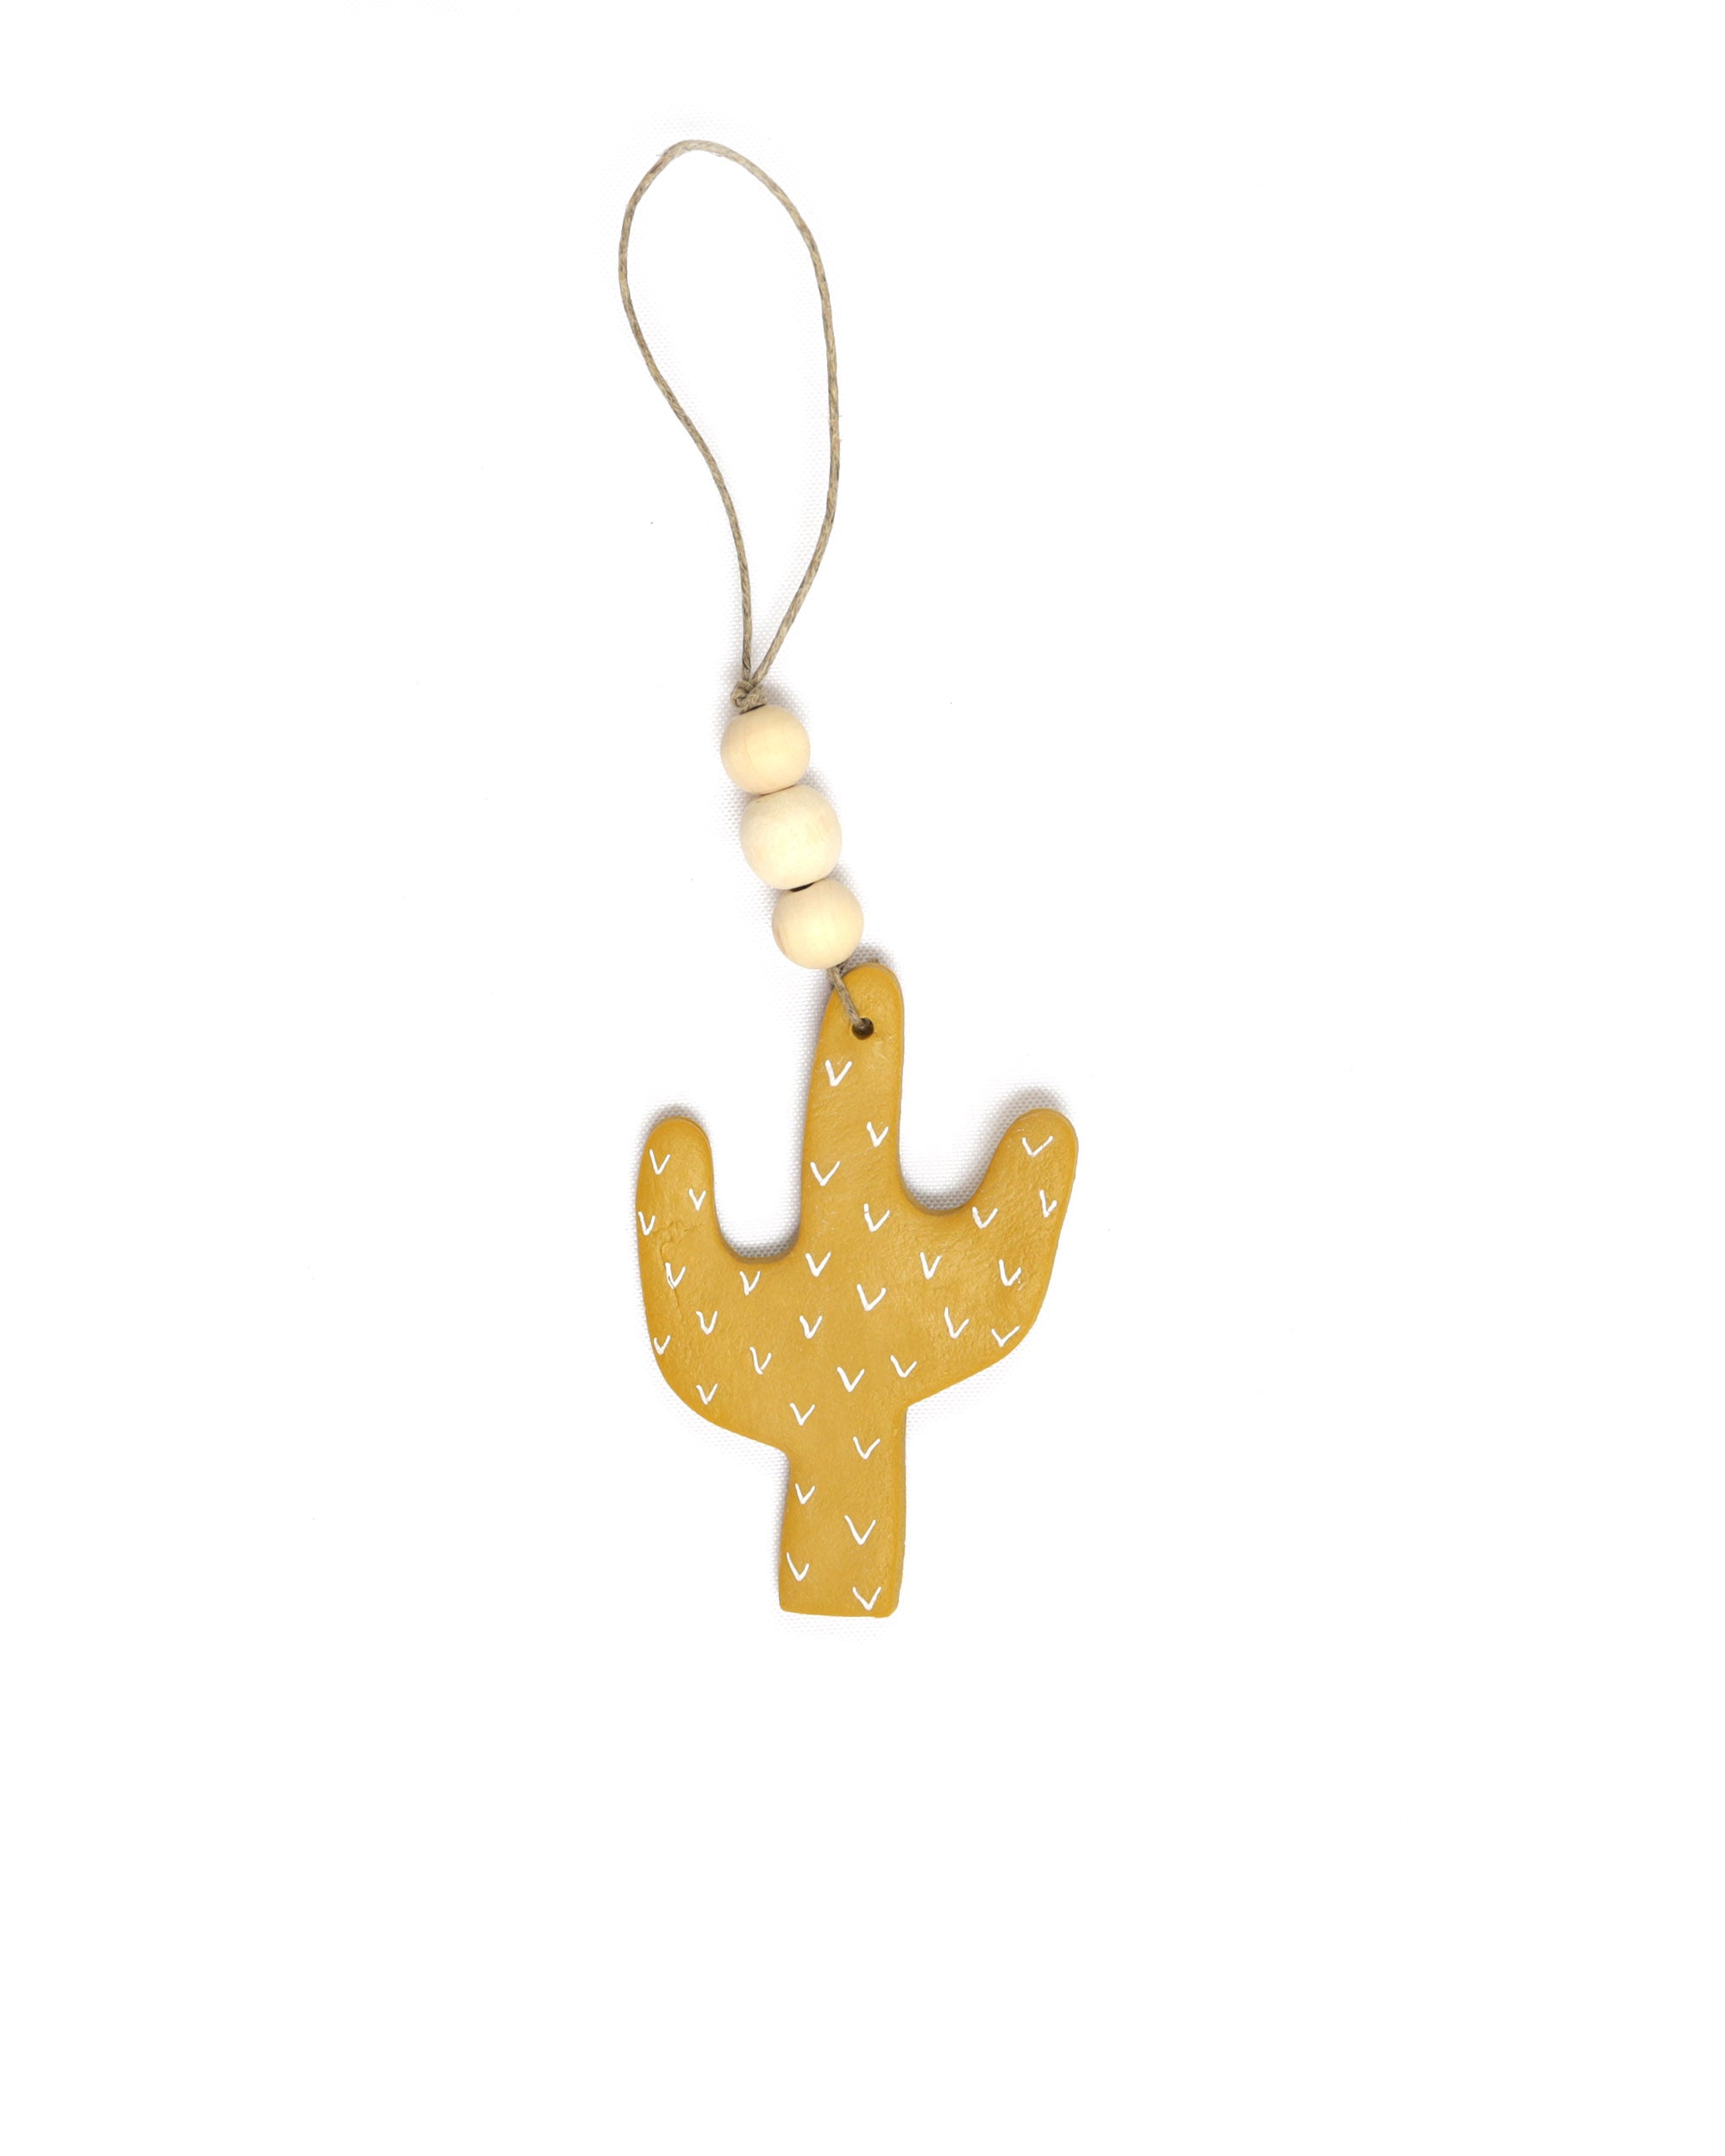 Cactus Christmas Ornament (3 pack)